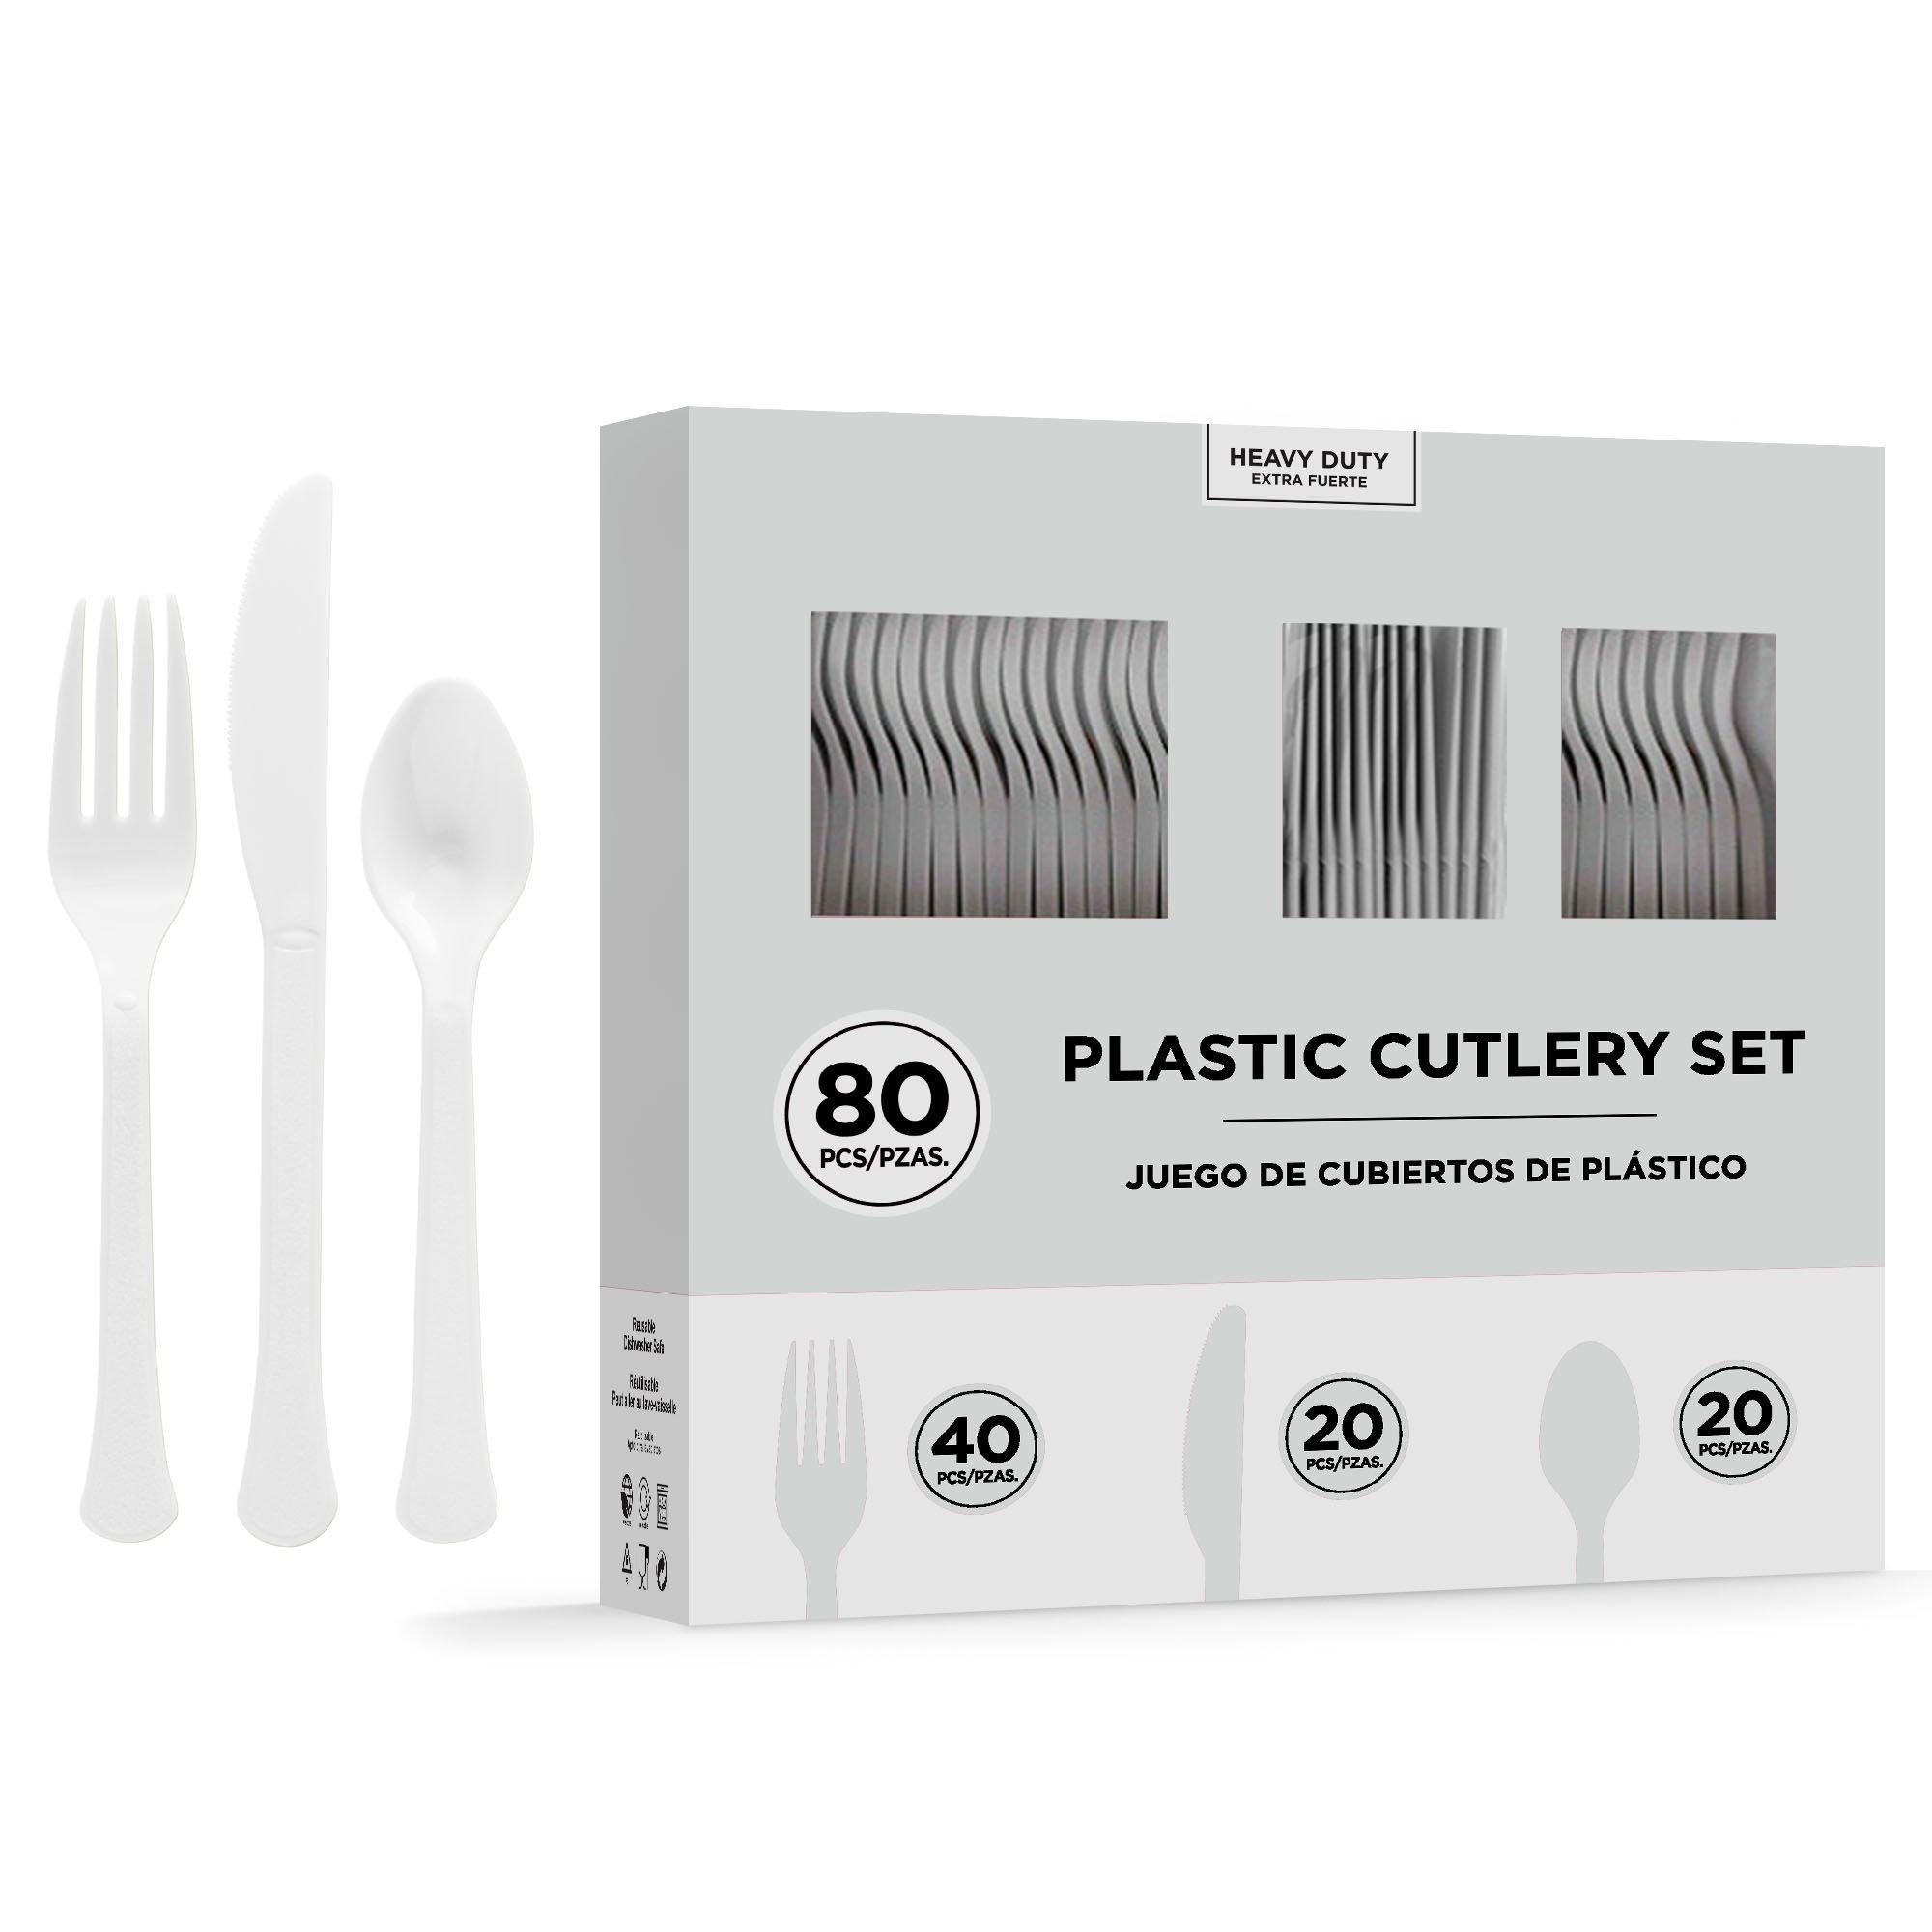 Frosty White Plastic Forks 20ct